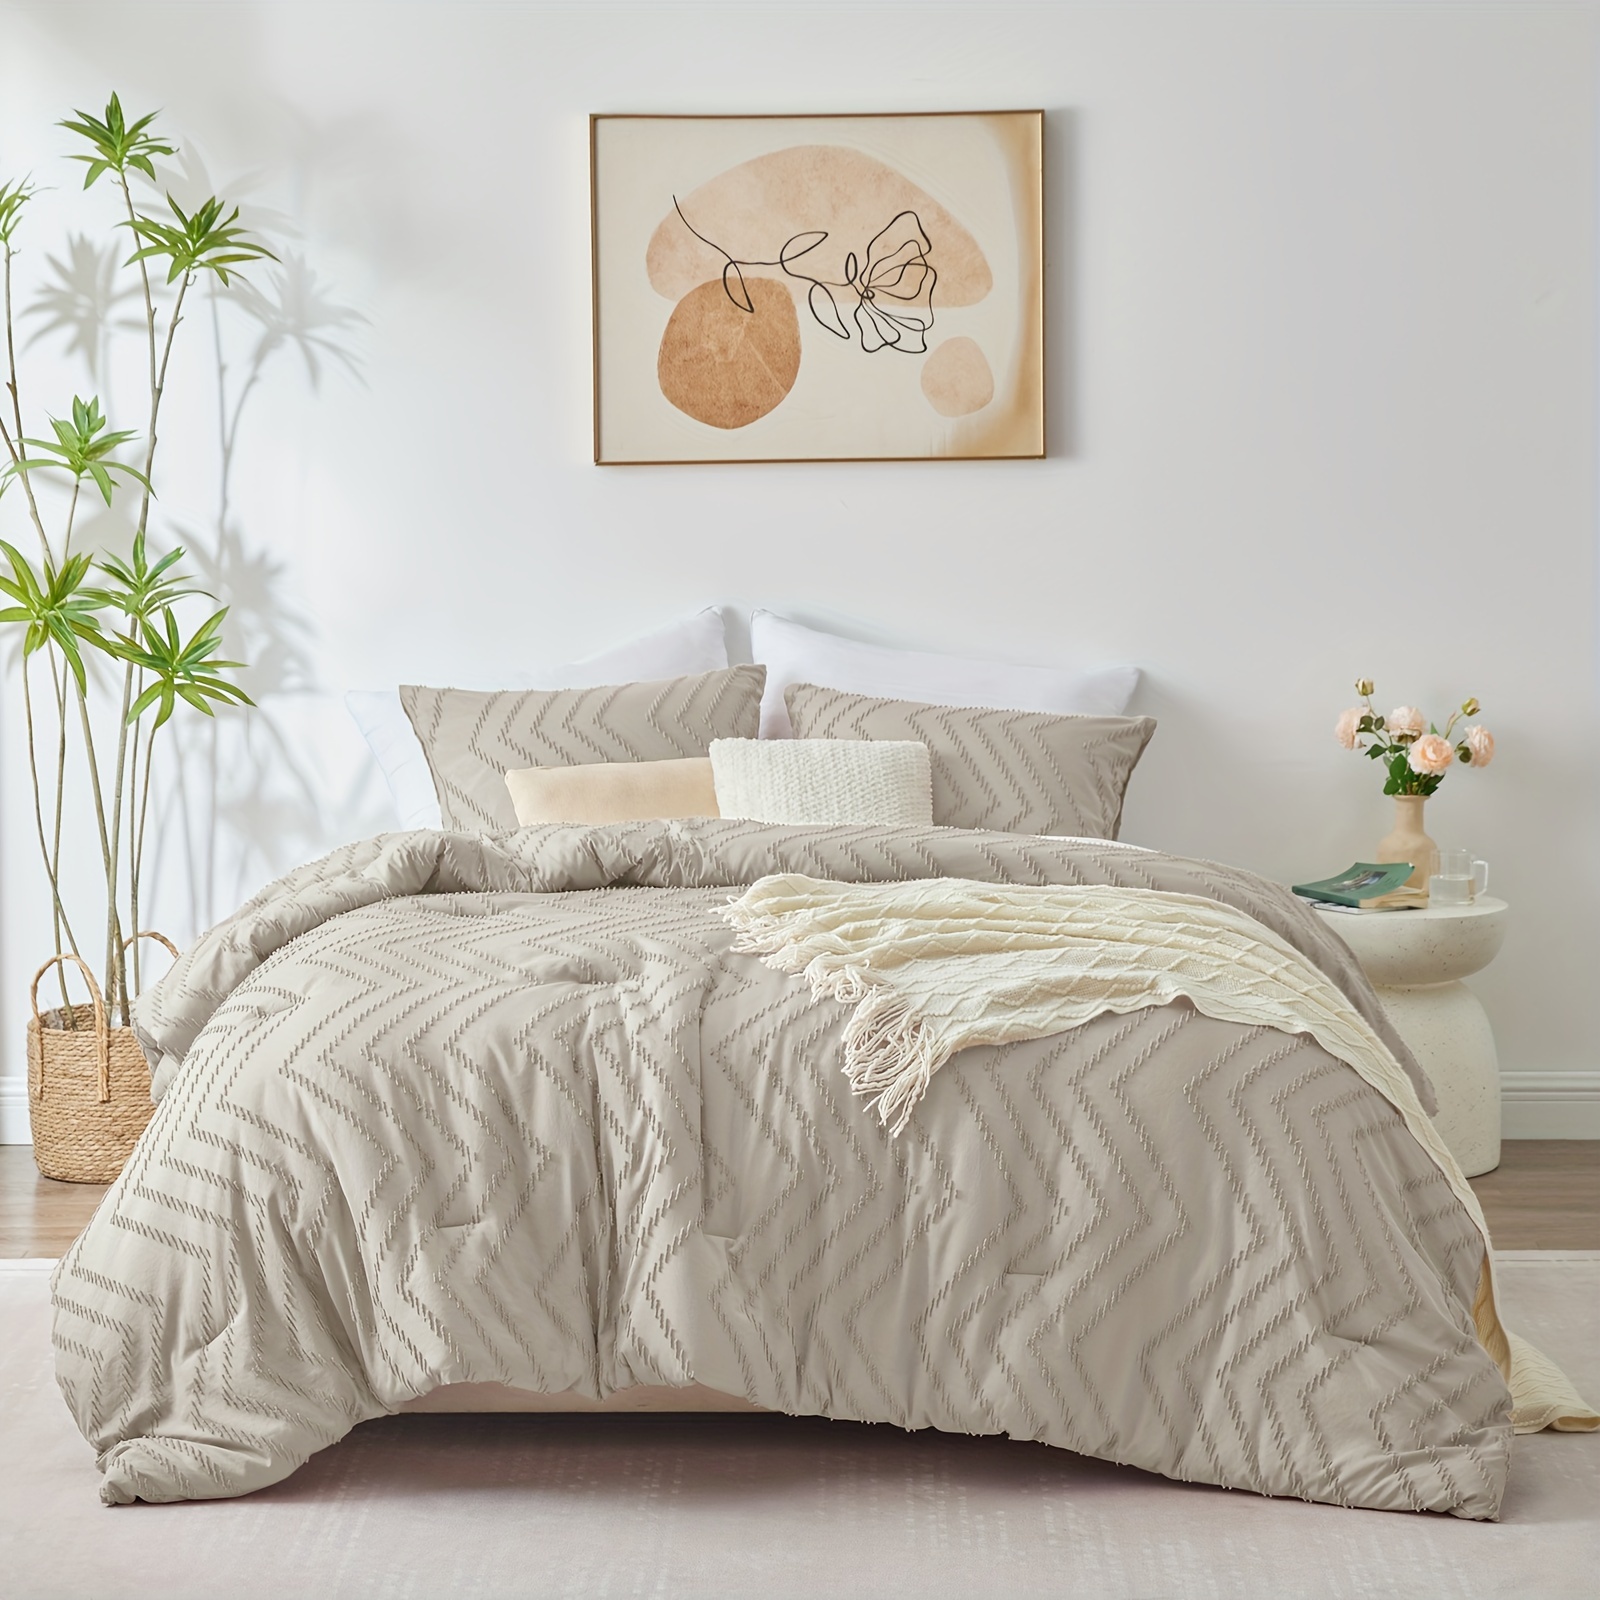 

Queen Comforter Set, 3 Pieces Beige Boho Comforter Set Tufted Shabby Chic Bedding Set For All Seasons, Chevron Bedding Sets With 1 Comforter & 2 Pillow Shams